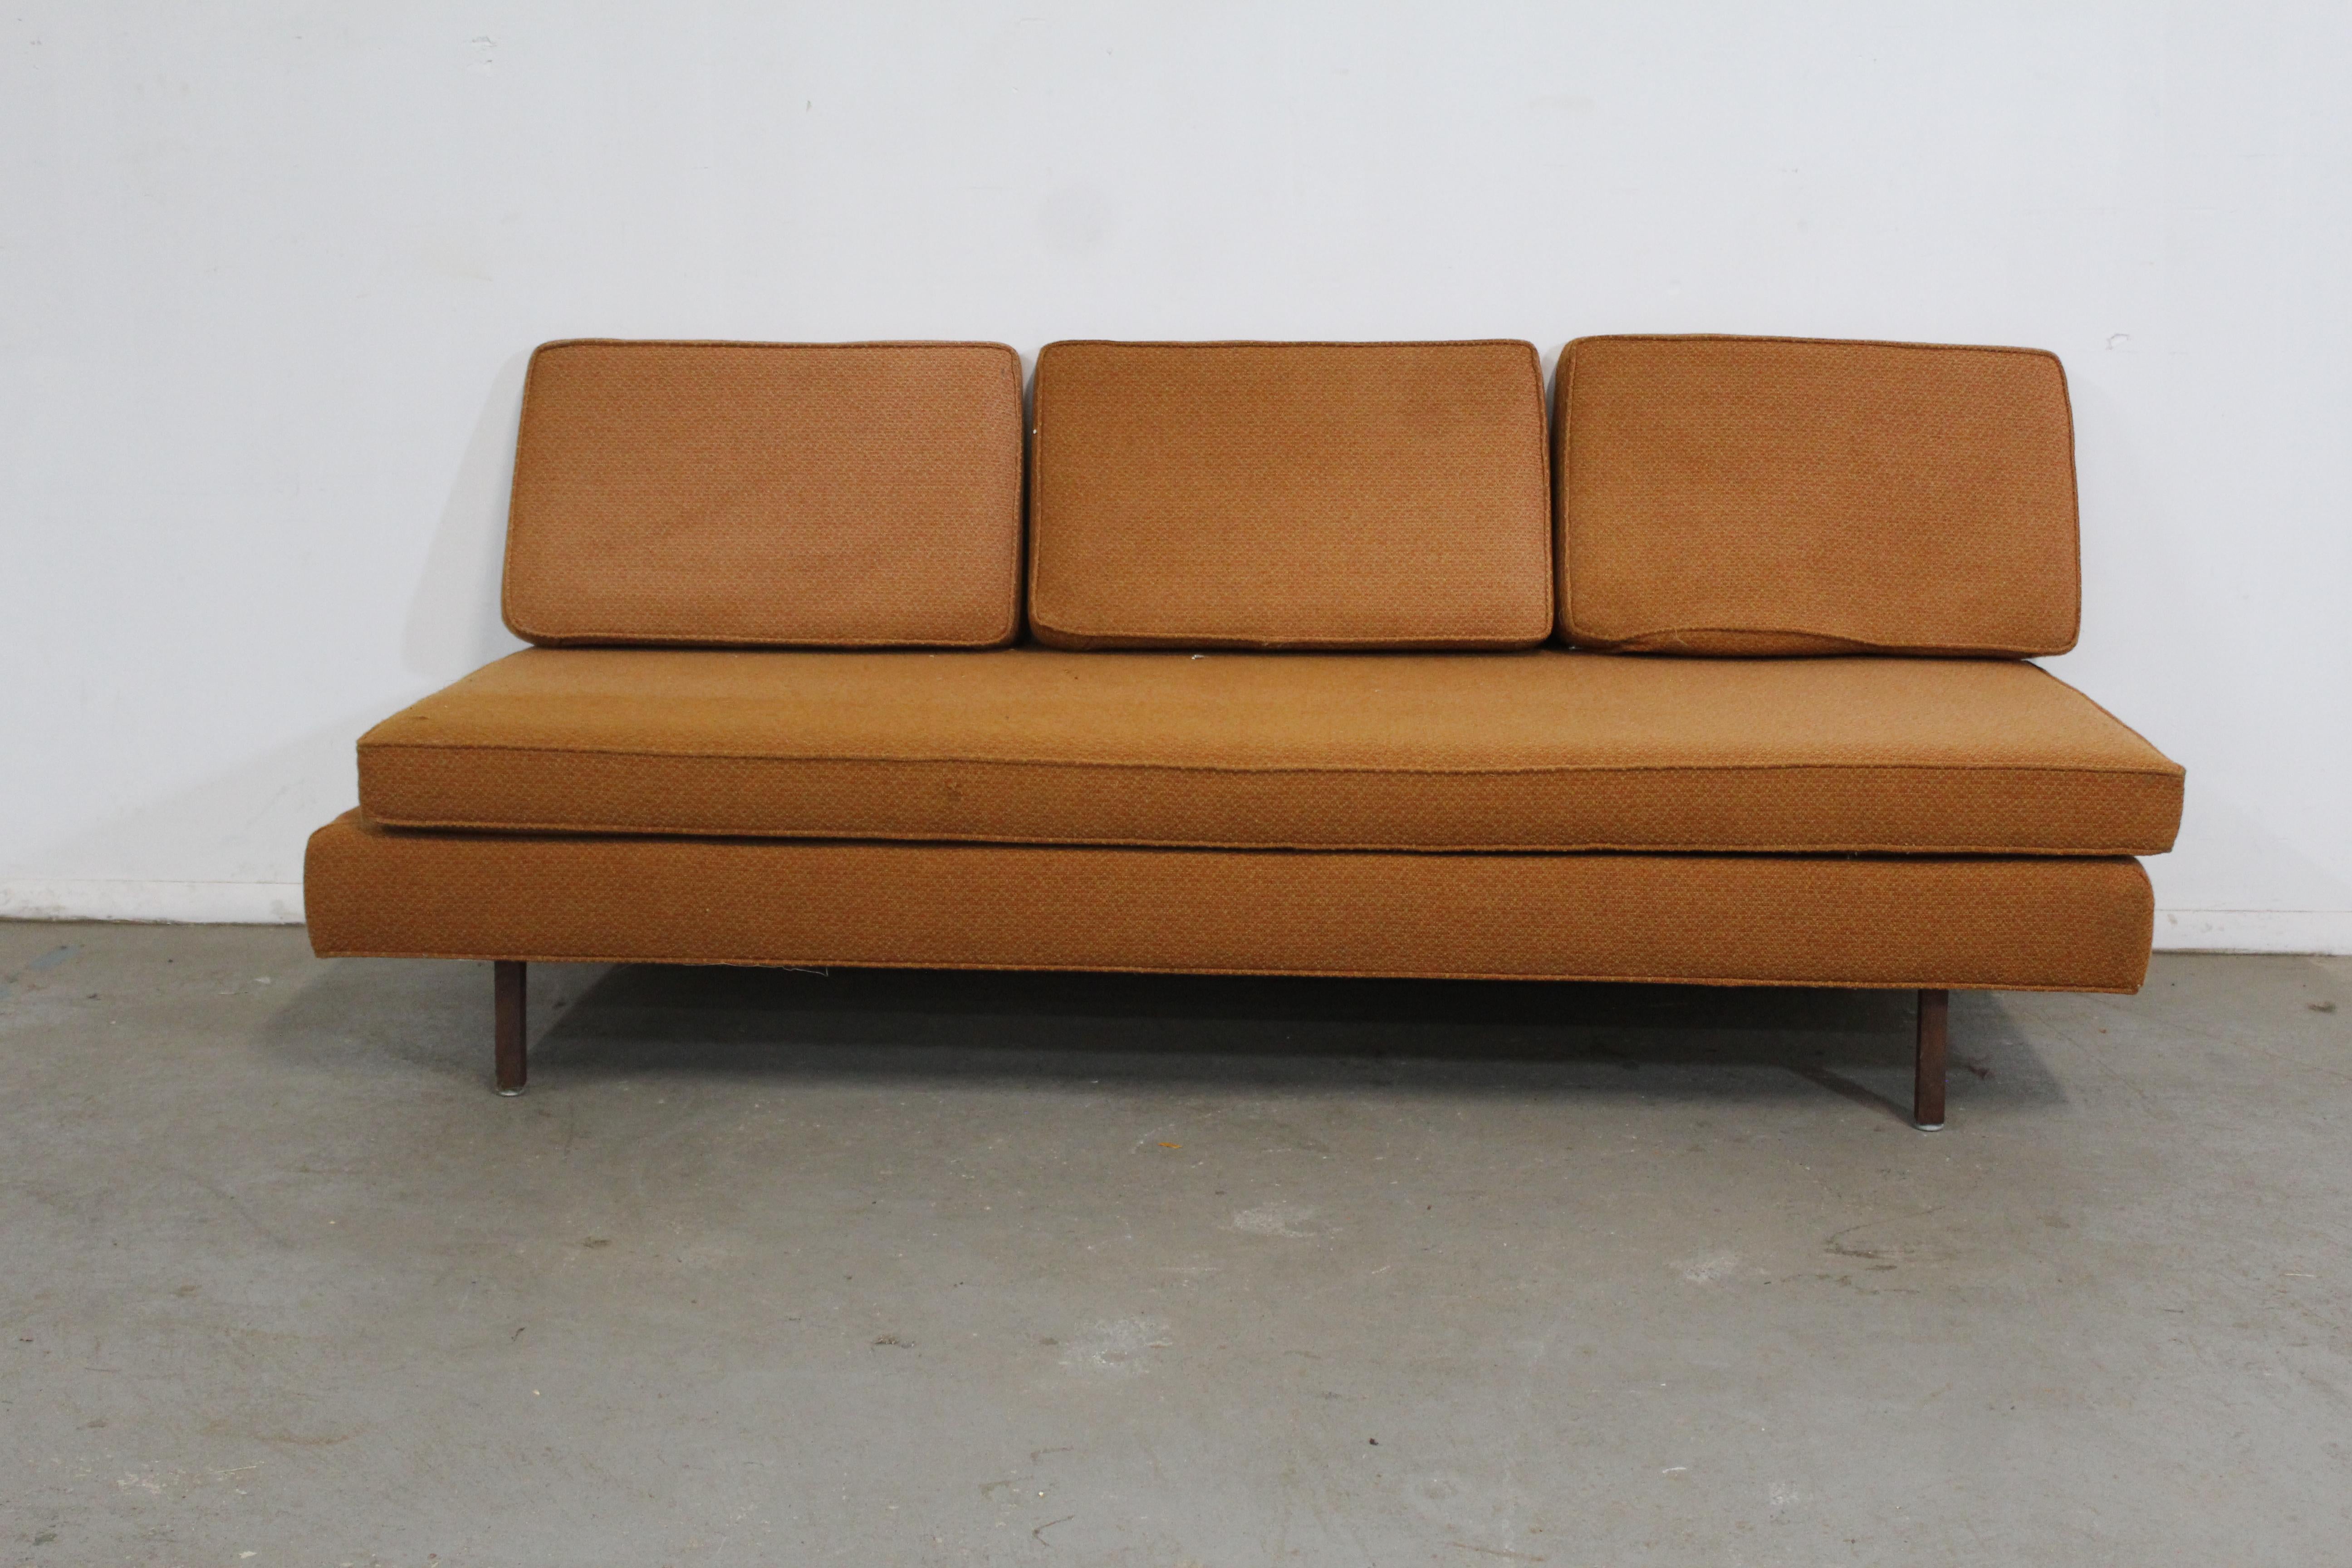 Mid-Century Modern Walnut Daybed/Sofa 

Offered is a Mid-Century Modern Walnut Daybed/Sofa in the style of Adrian Pearsall.  The sofa has three removable cushions and is on Walnut legs. This piece is a wall sofa as it it backless.  It is in great